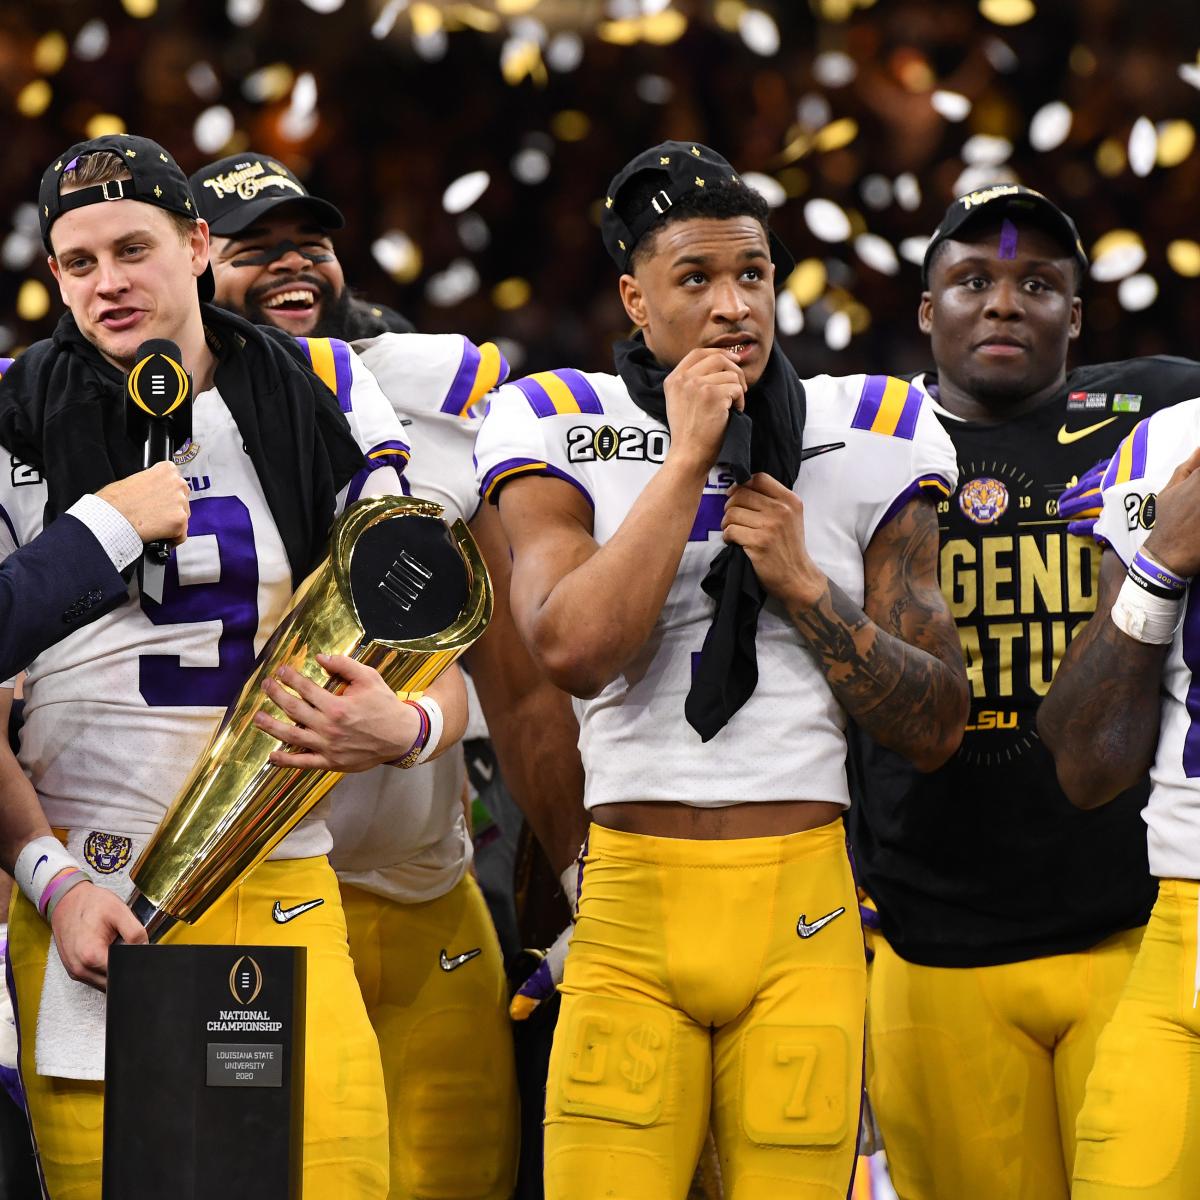 LSU Sets SEC Record with 14 Picks in 2020 NFL Draft After CFP Title